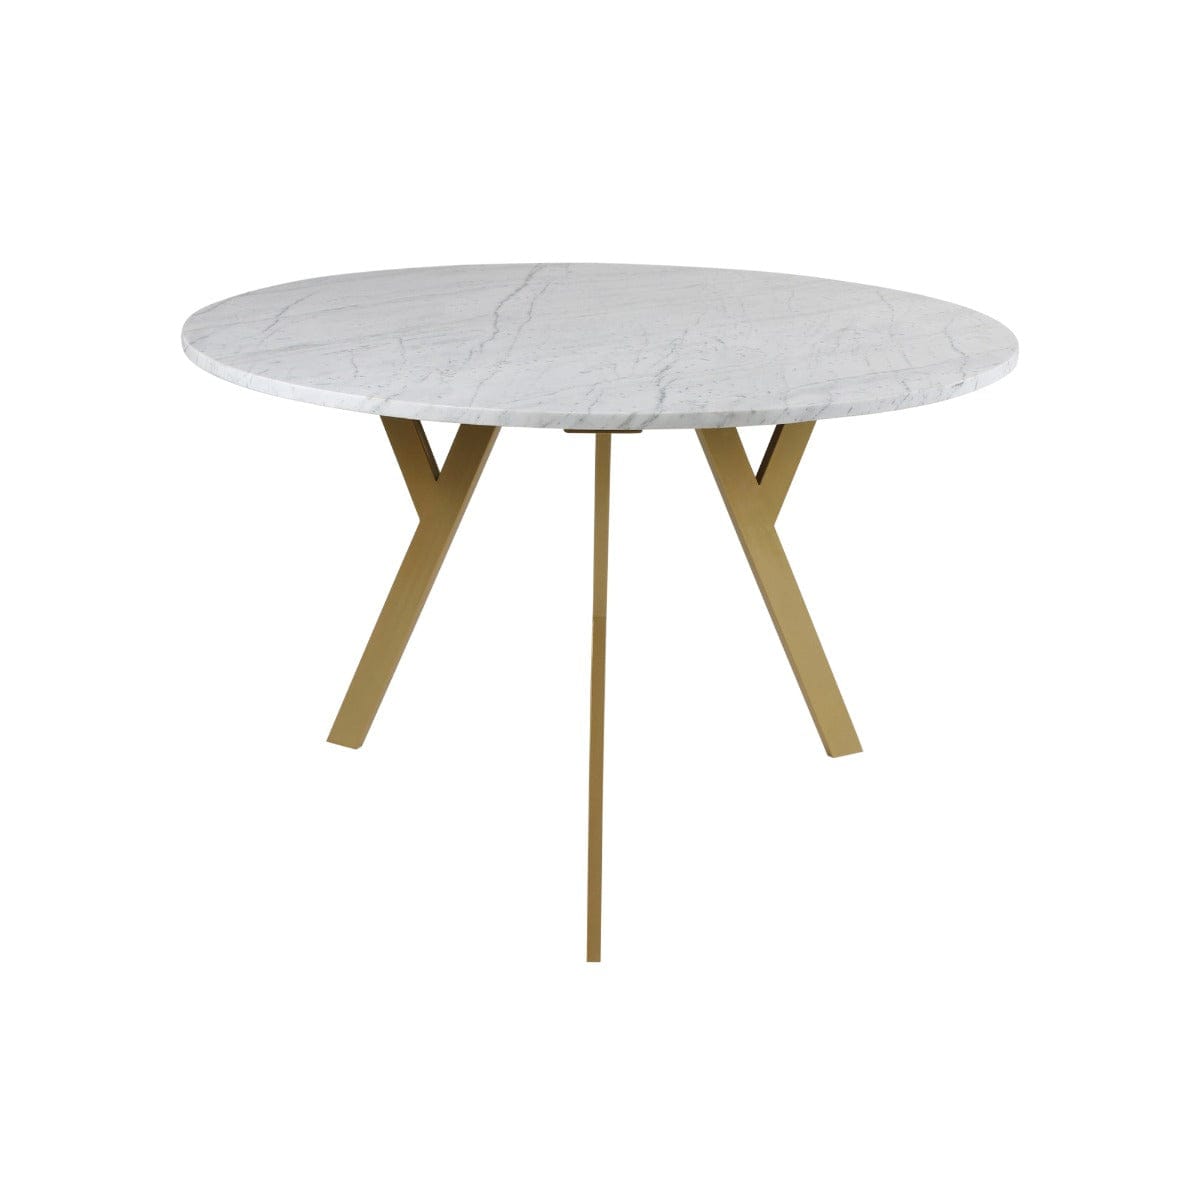 Kir 4 Seater Round Marble Dining Table In Gold Finish